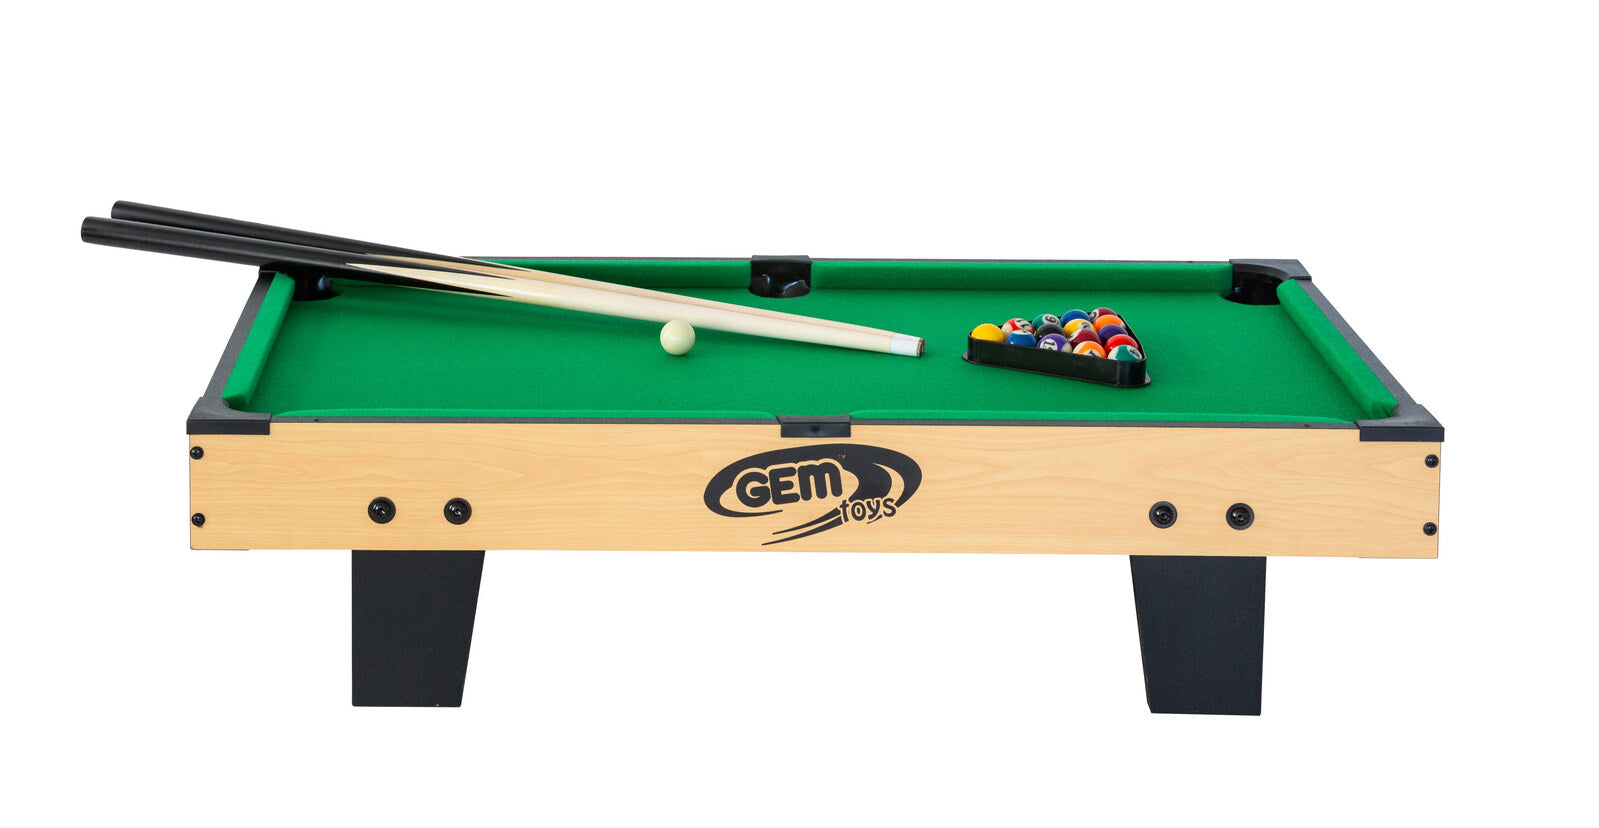 4-in-1 Games - Soccer, Table Tennis, Slide Hockey and Billiard Table - 0